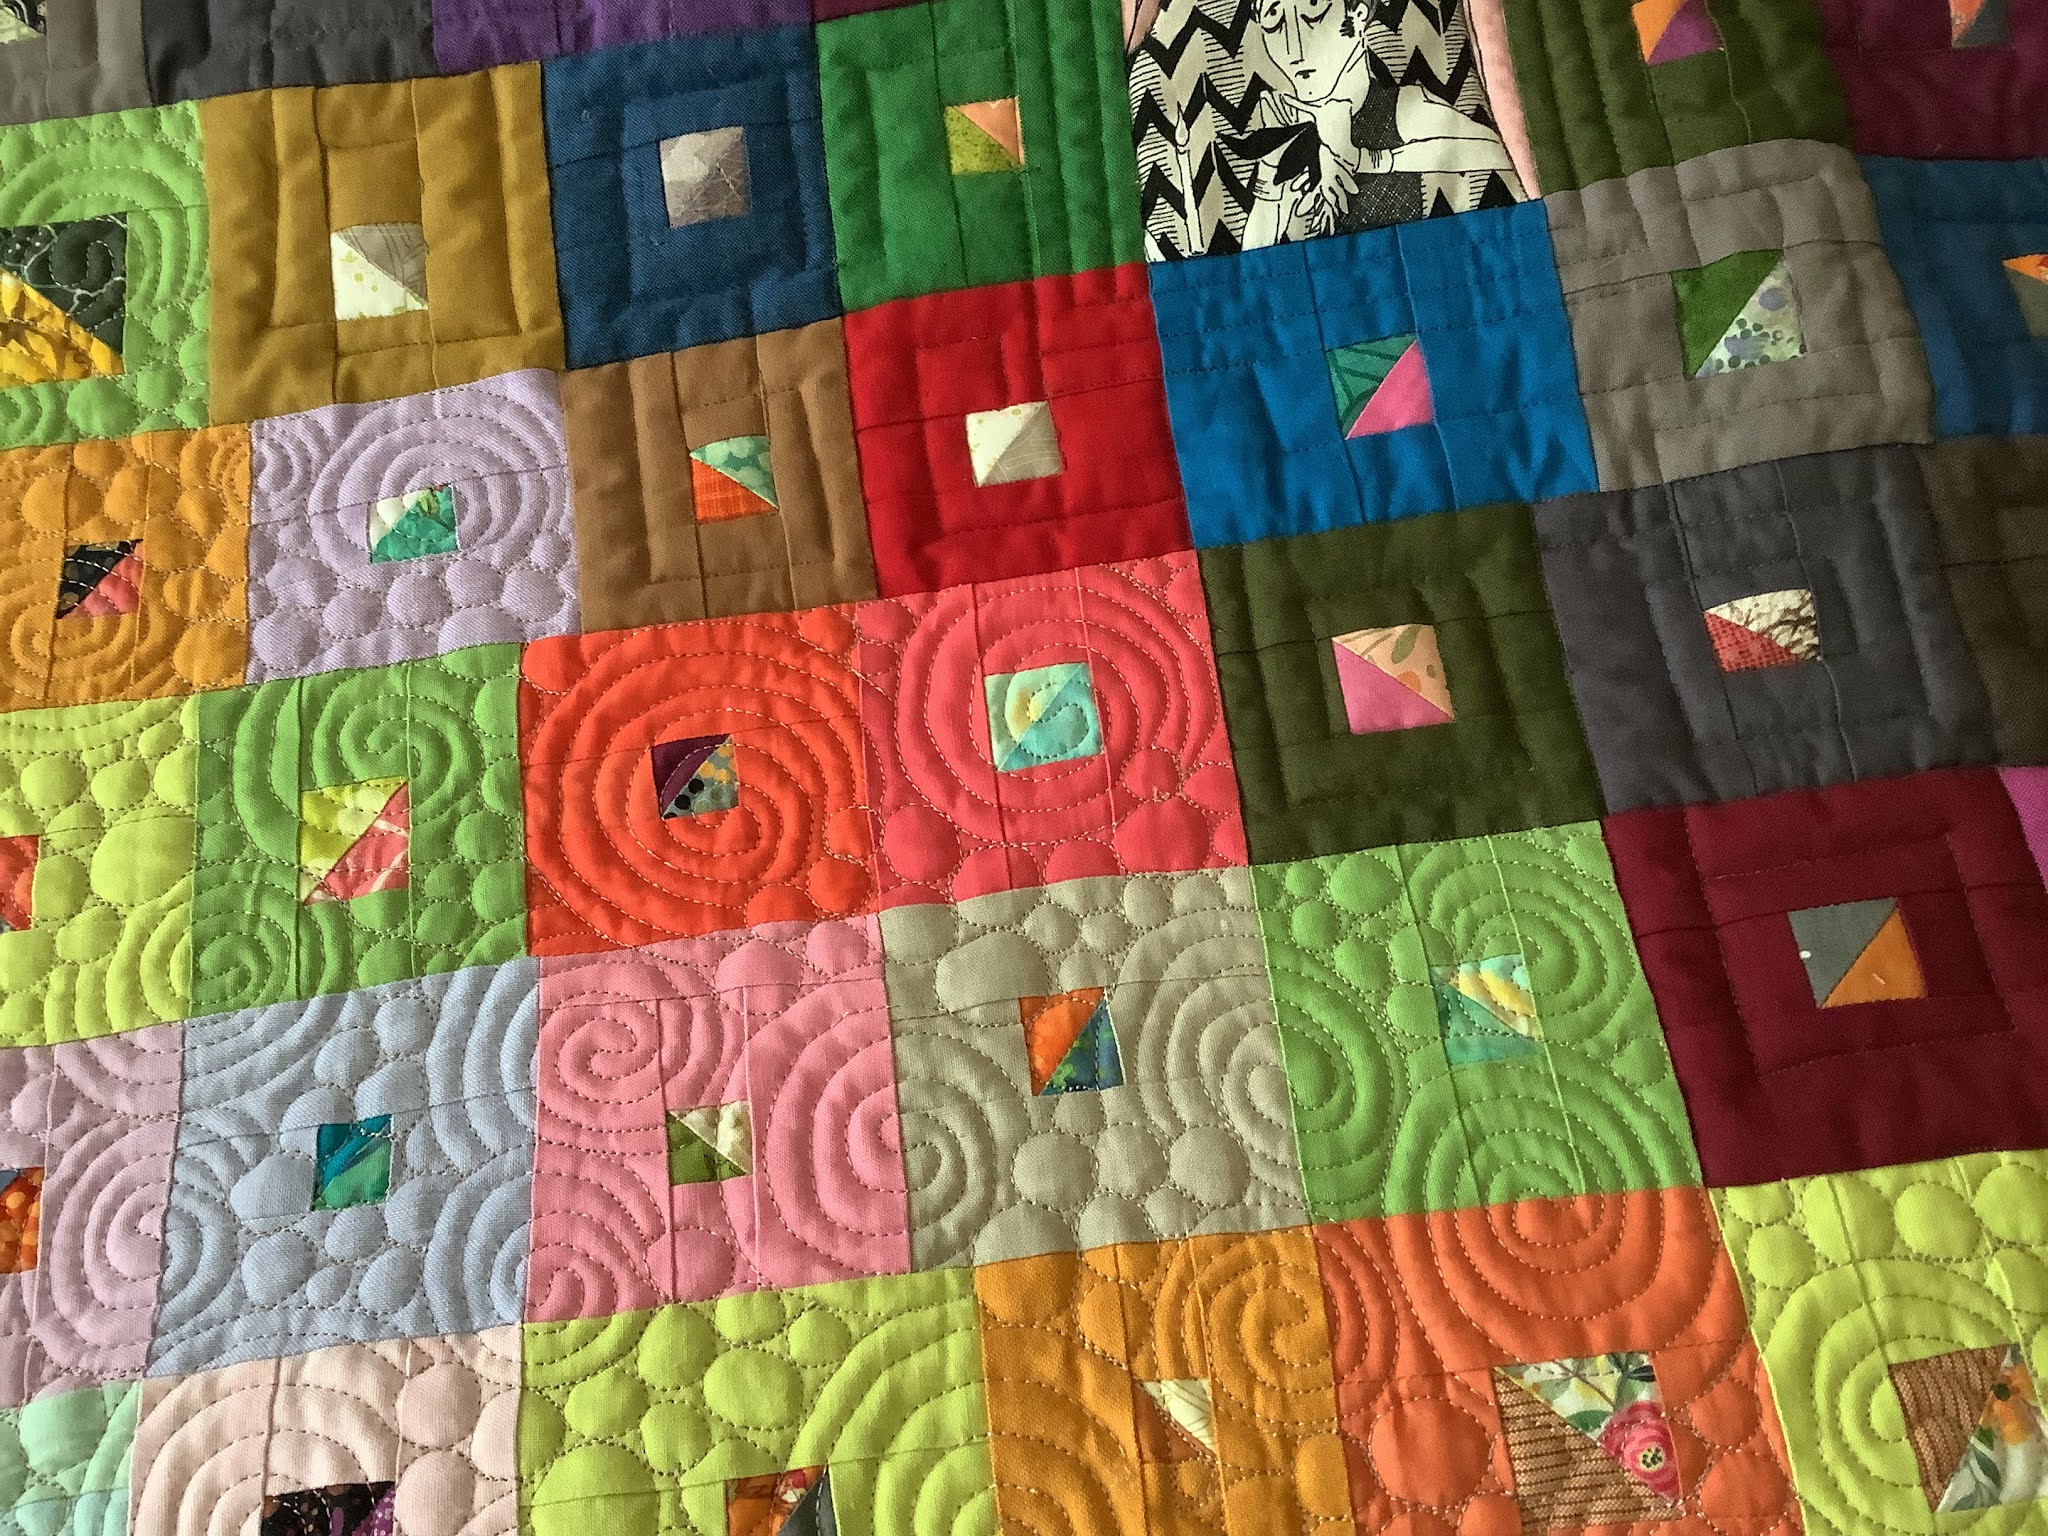 Fun with Free Motion Quilting - 1 Hour Guild Video Presentation –